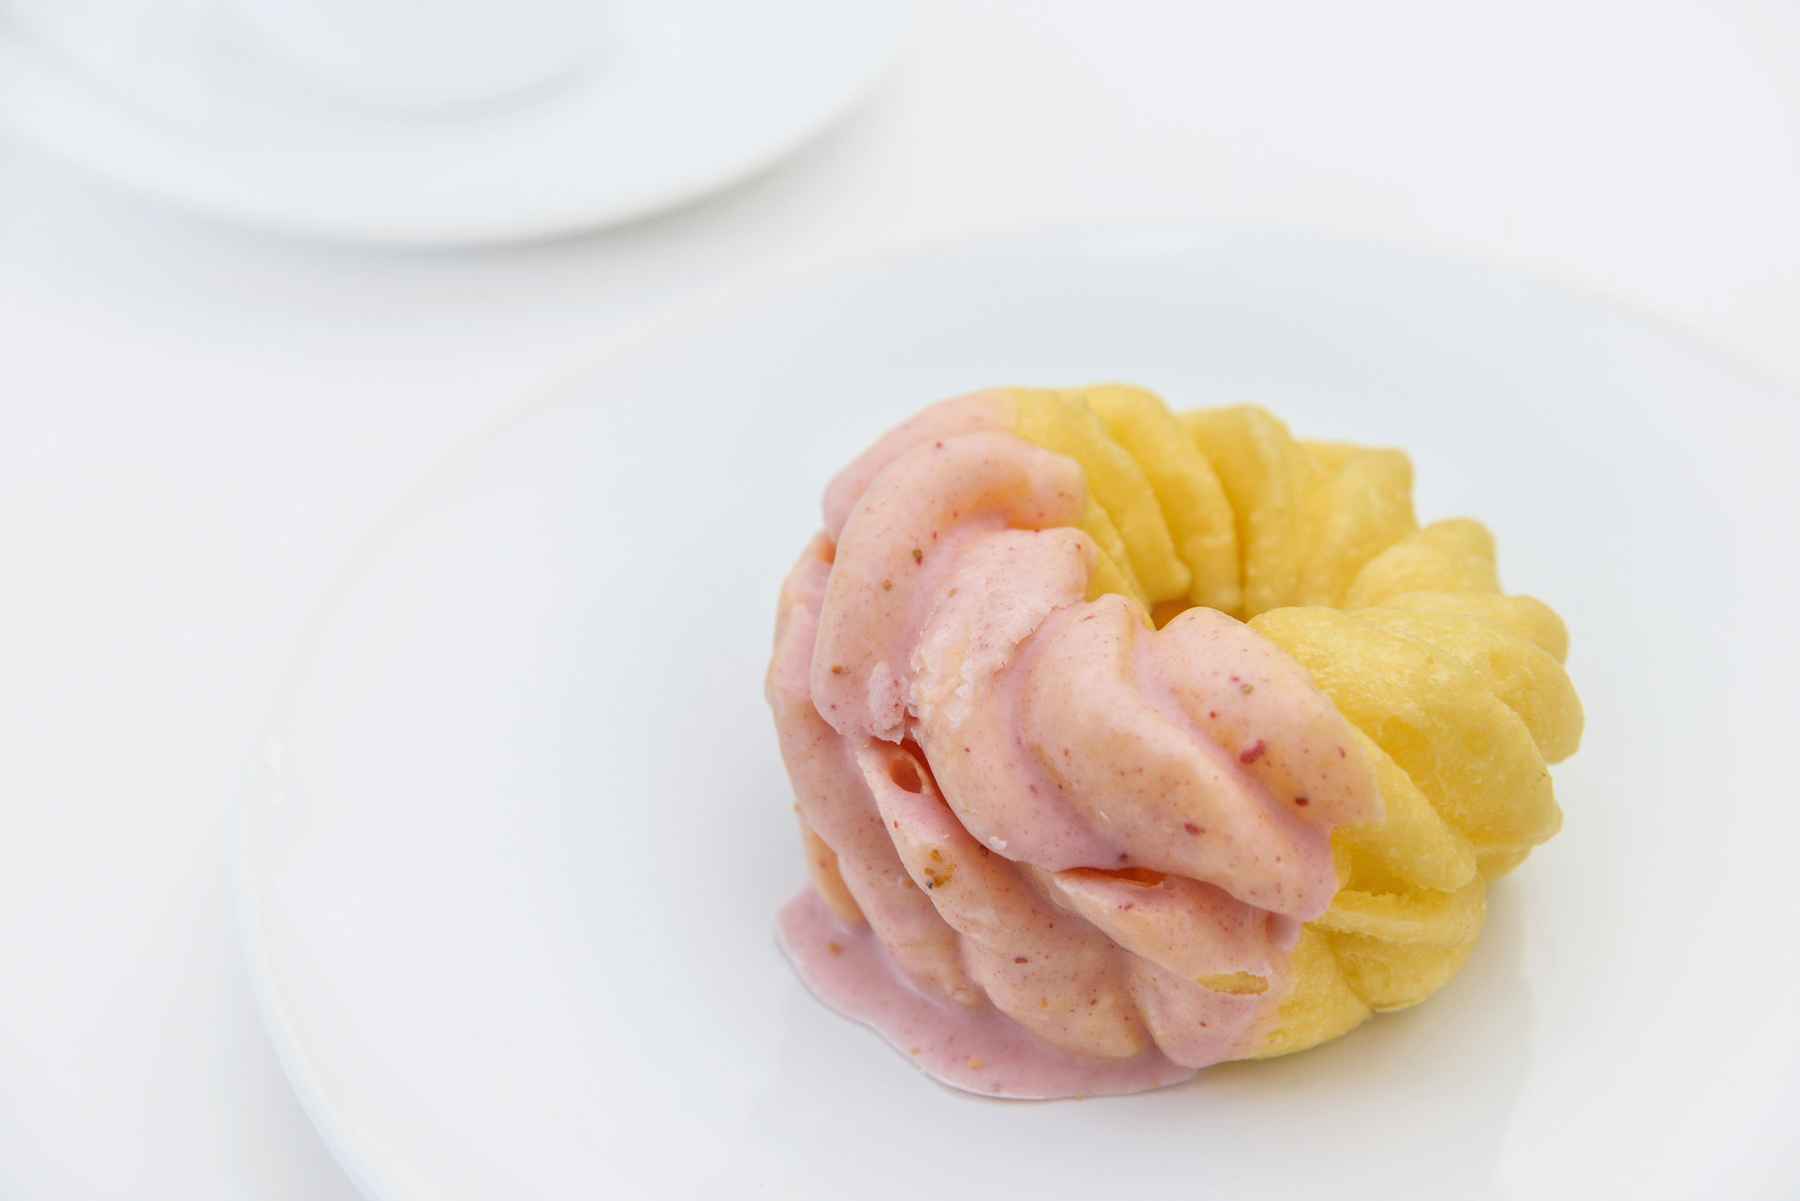 French cruller doughnut with strawberry glaze on a plate.